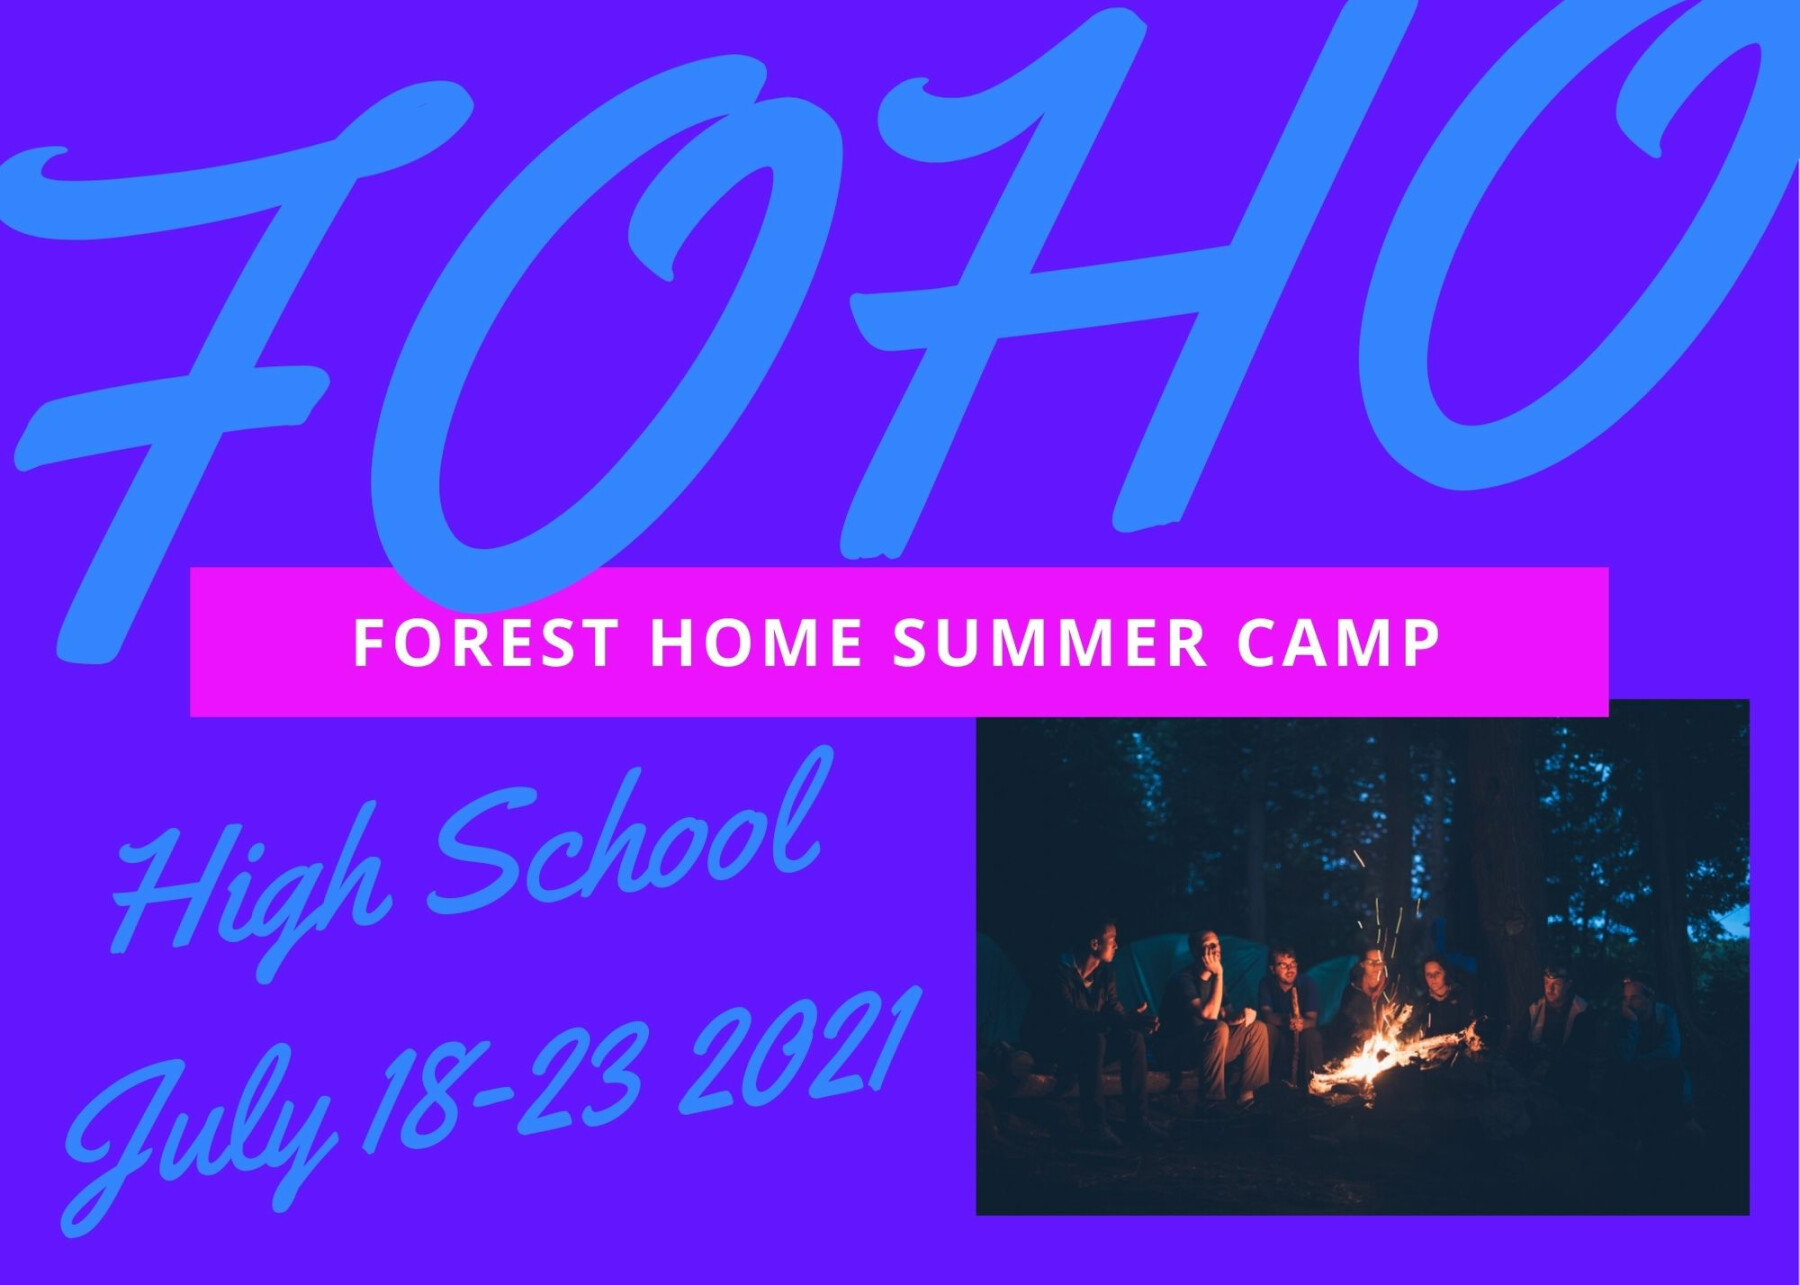 Forest Home Summer Camp, Forest Falls, CA High School Valley